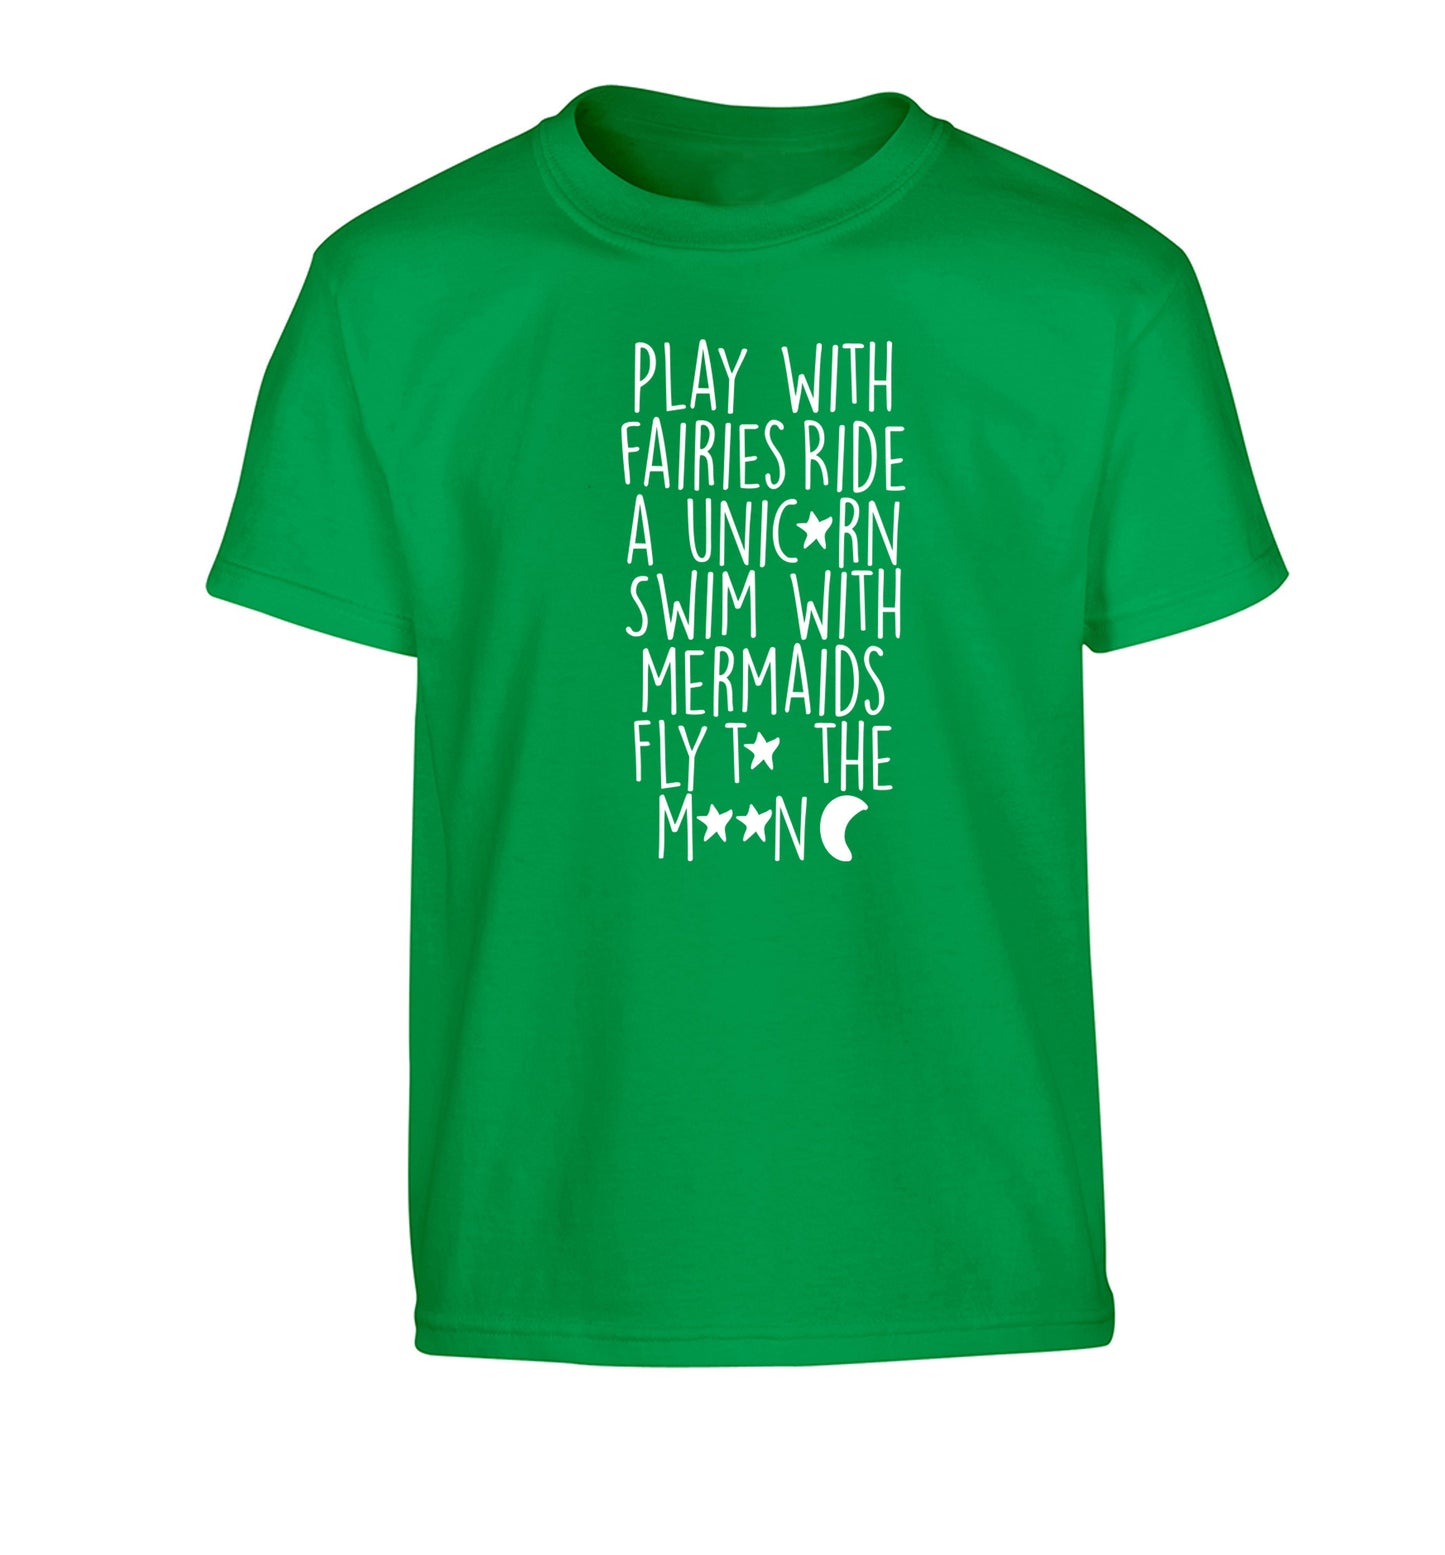 Play with fairies ride a unicorn swim with mermaids fly to the moon Children's green Tshirt 12-14 Years